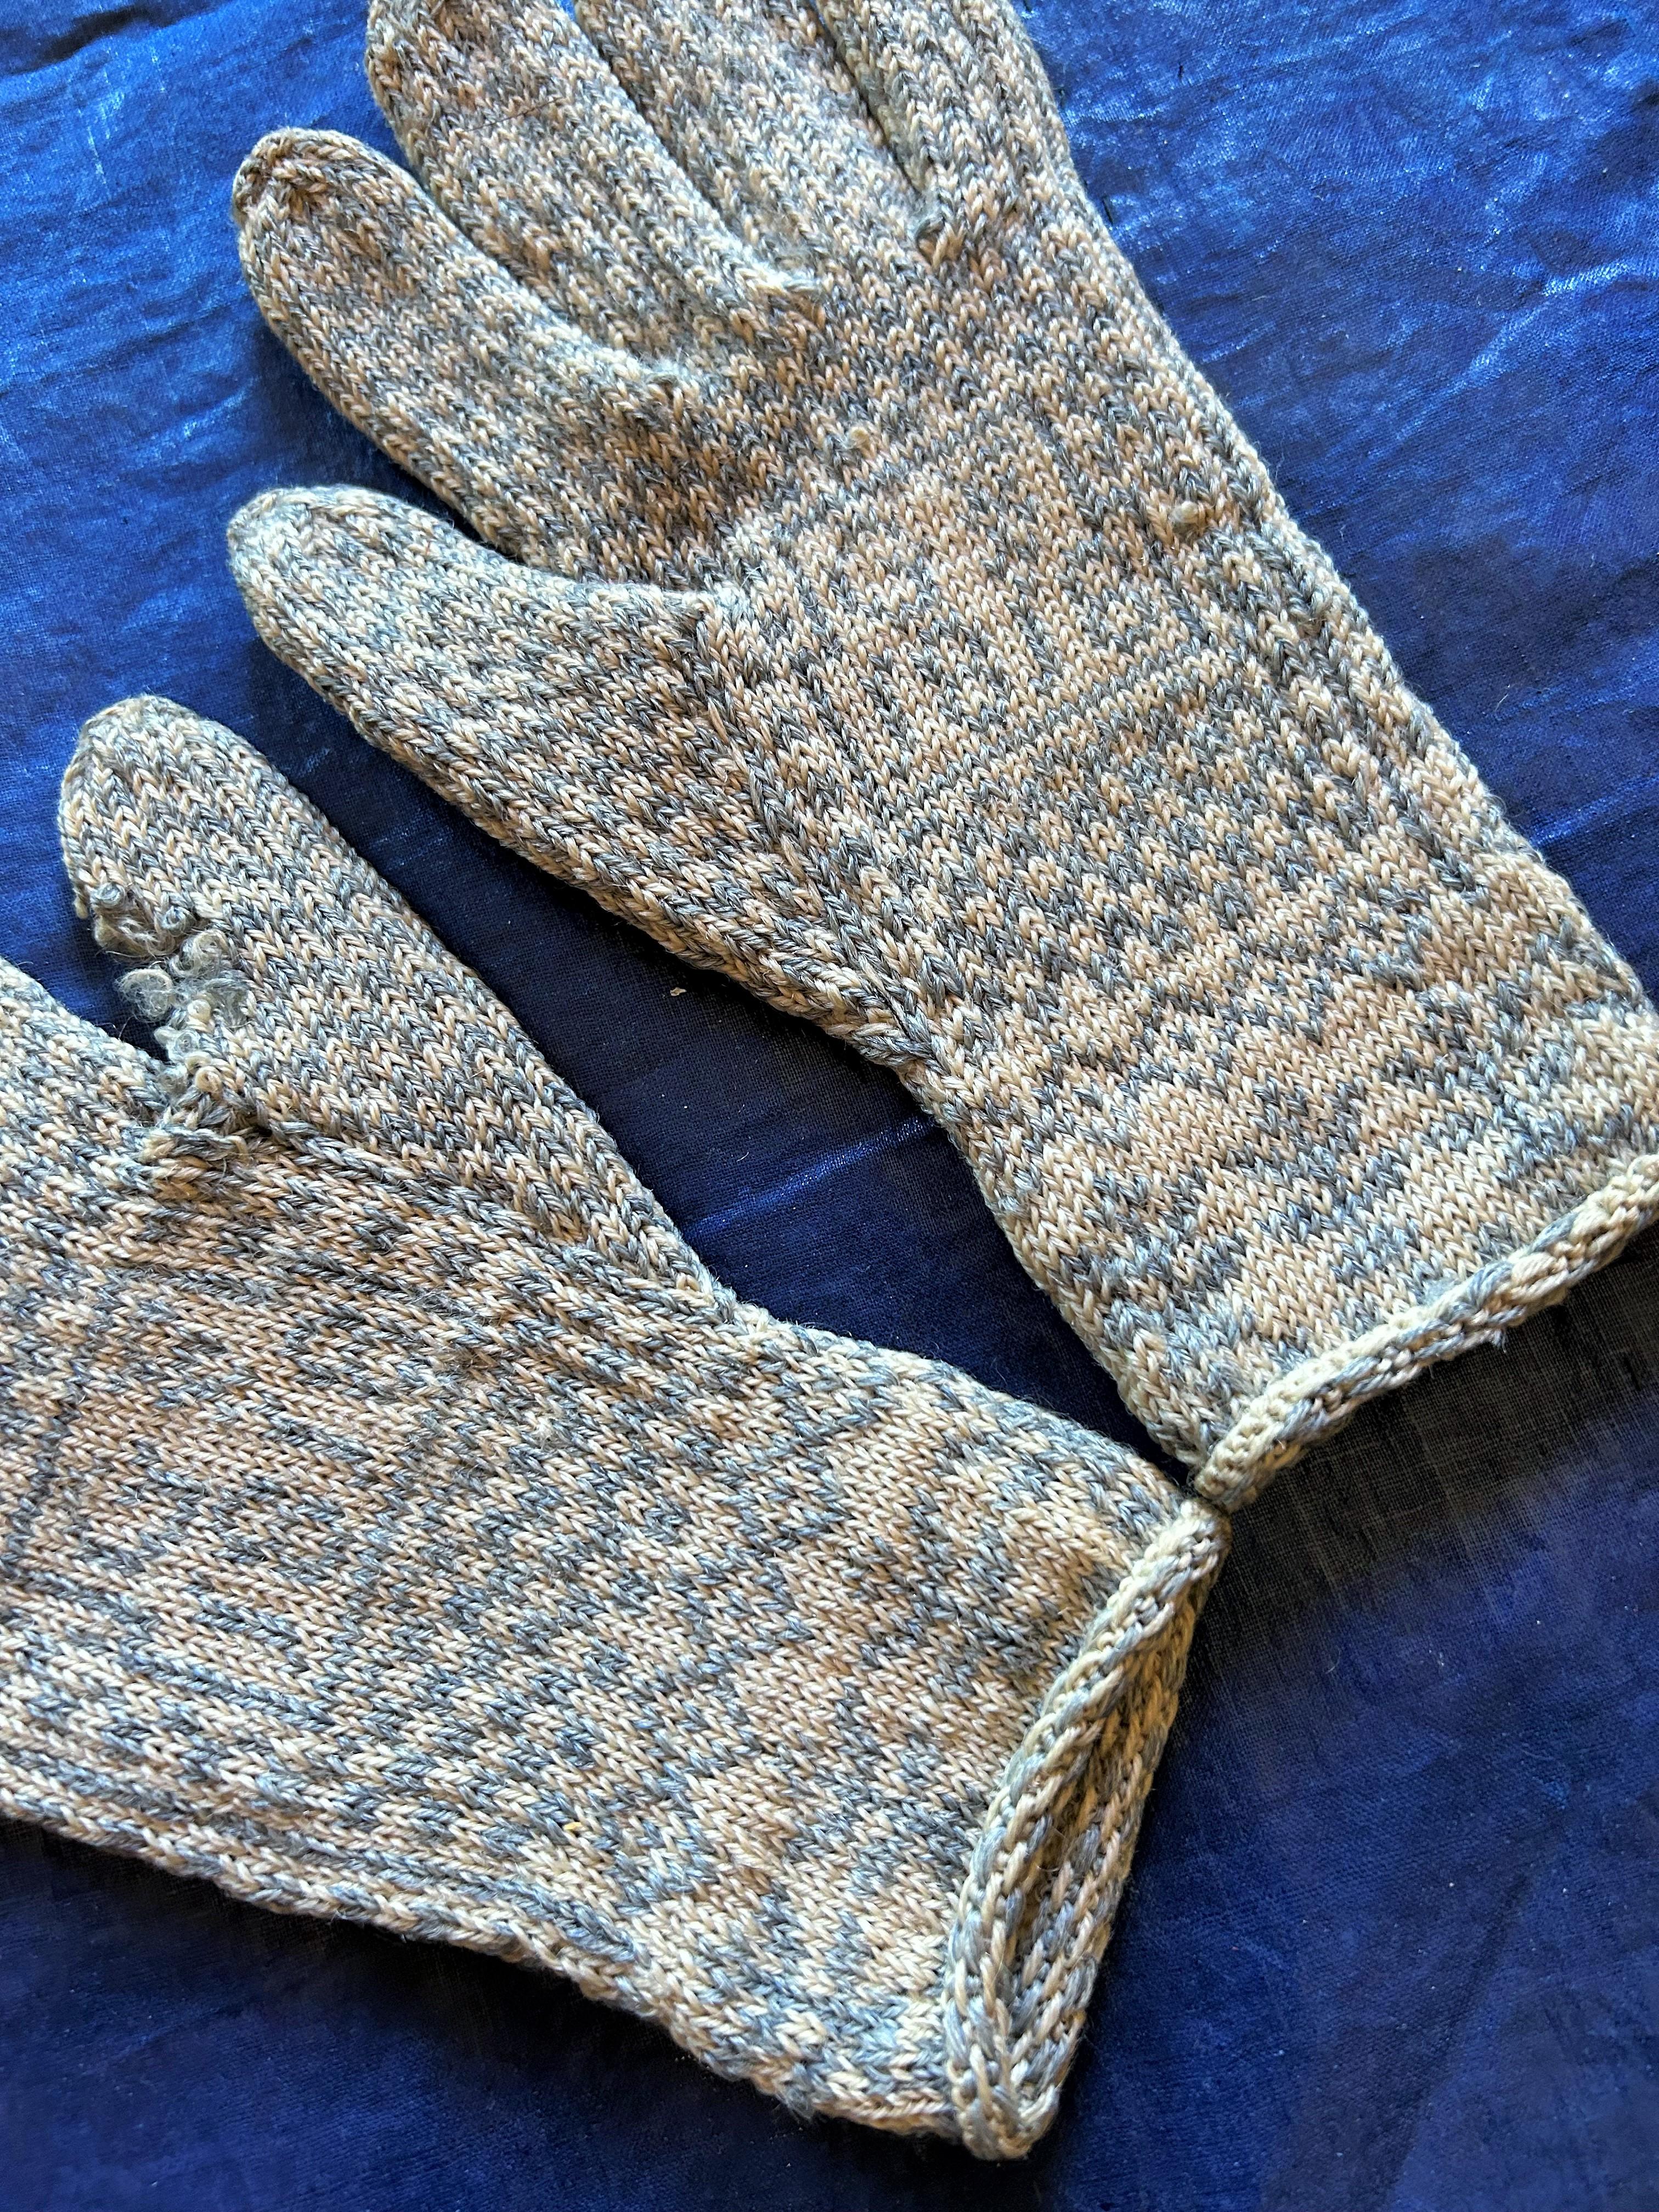 A pair of Sanquhar wool knitted gloves near Dumfries dated 1818 - Scotland 9